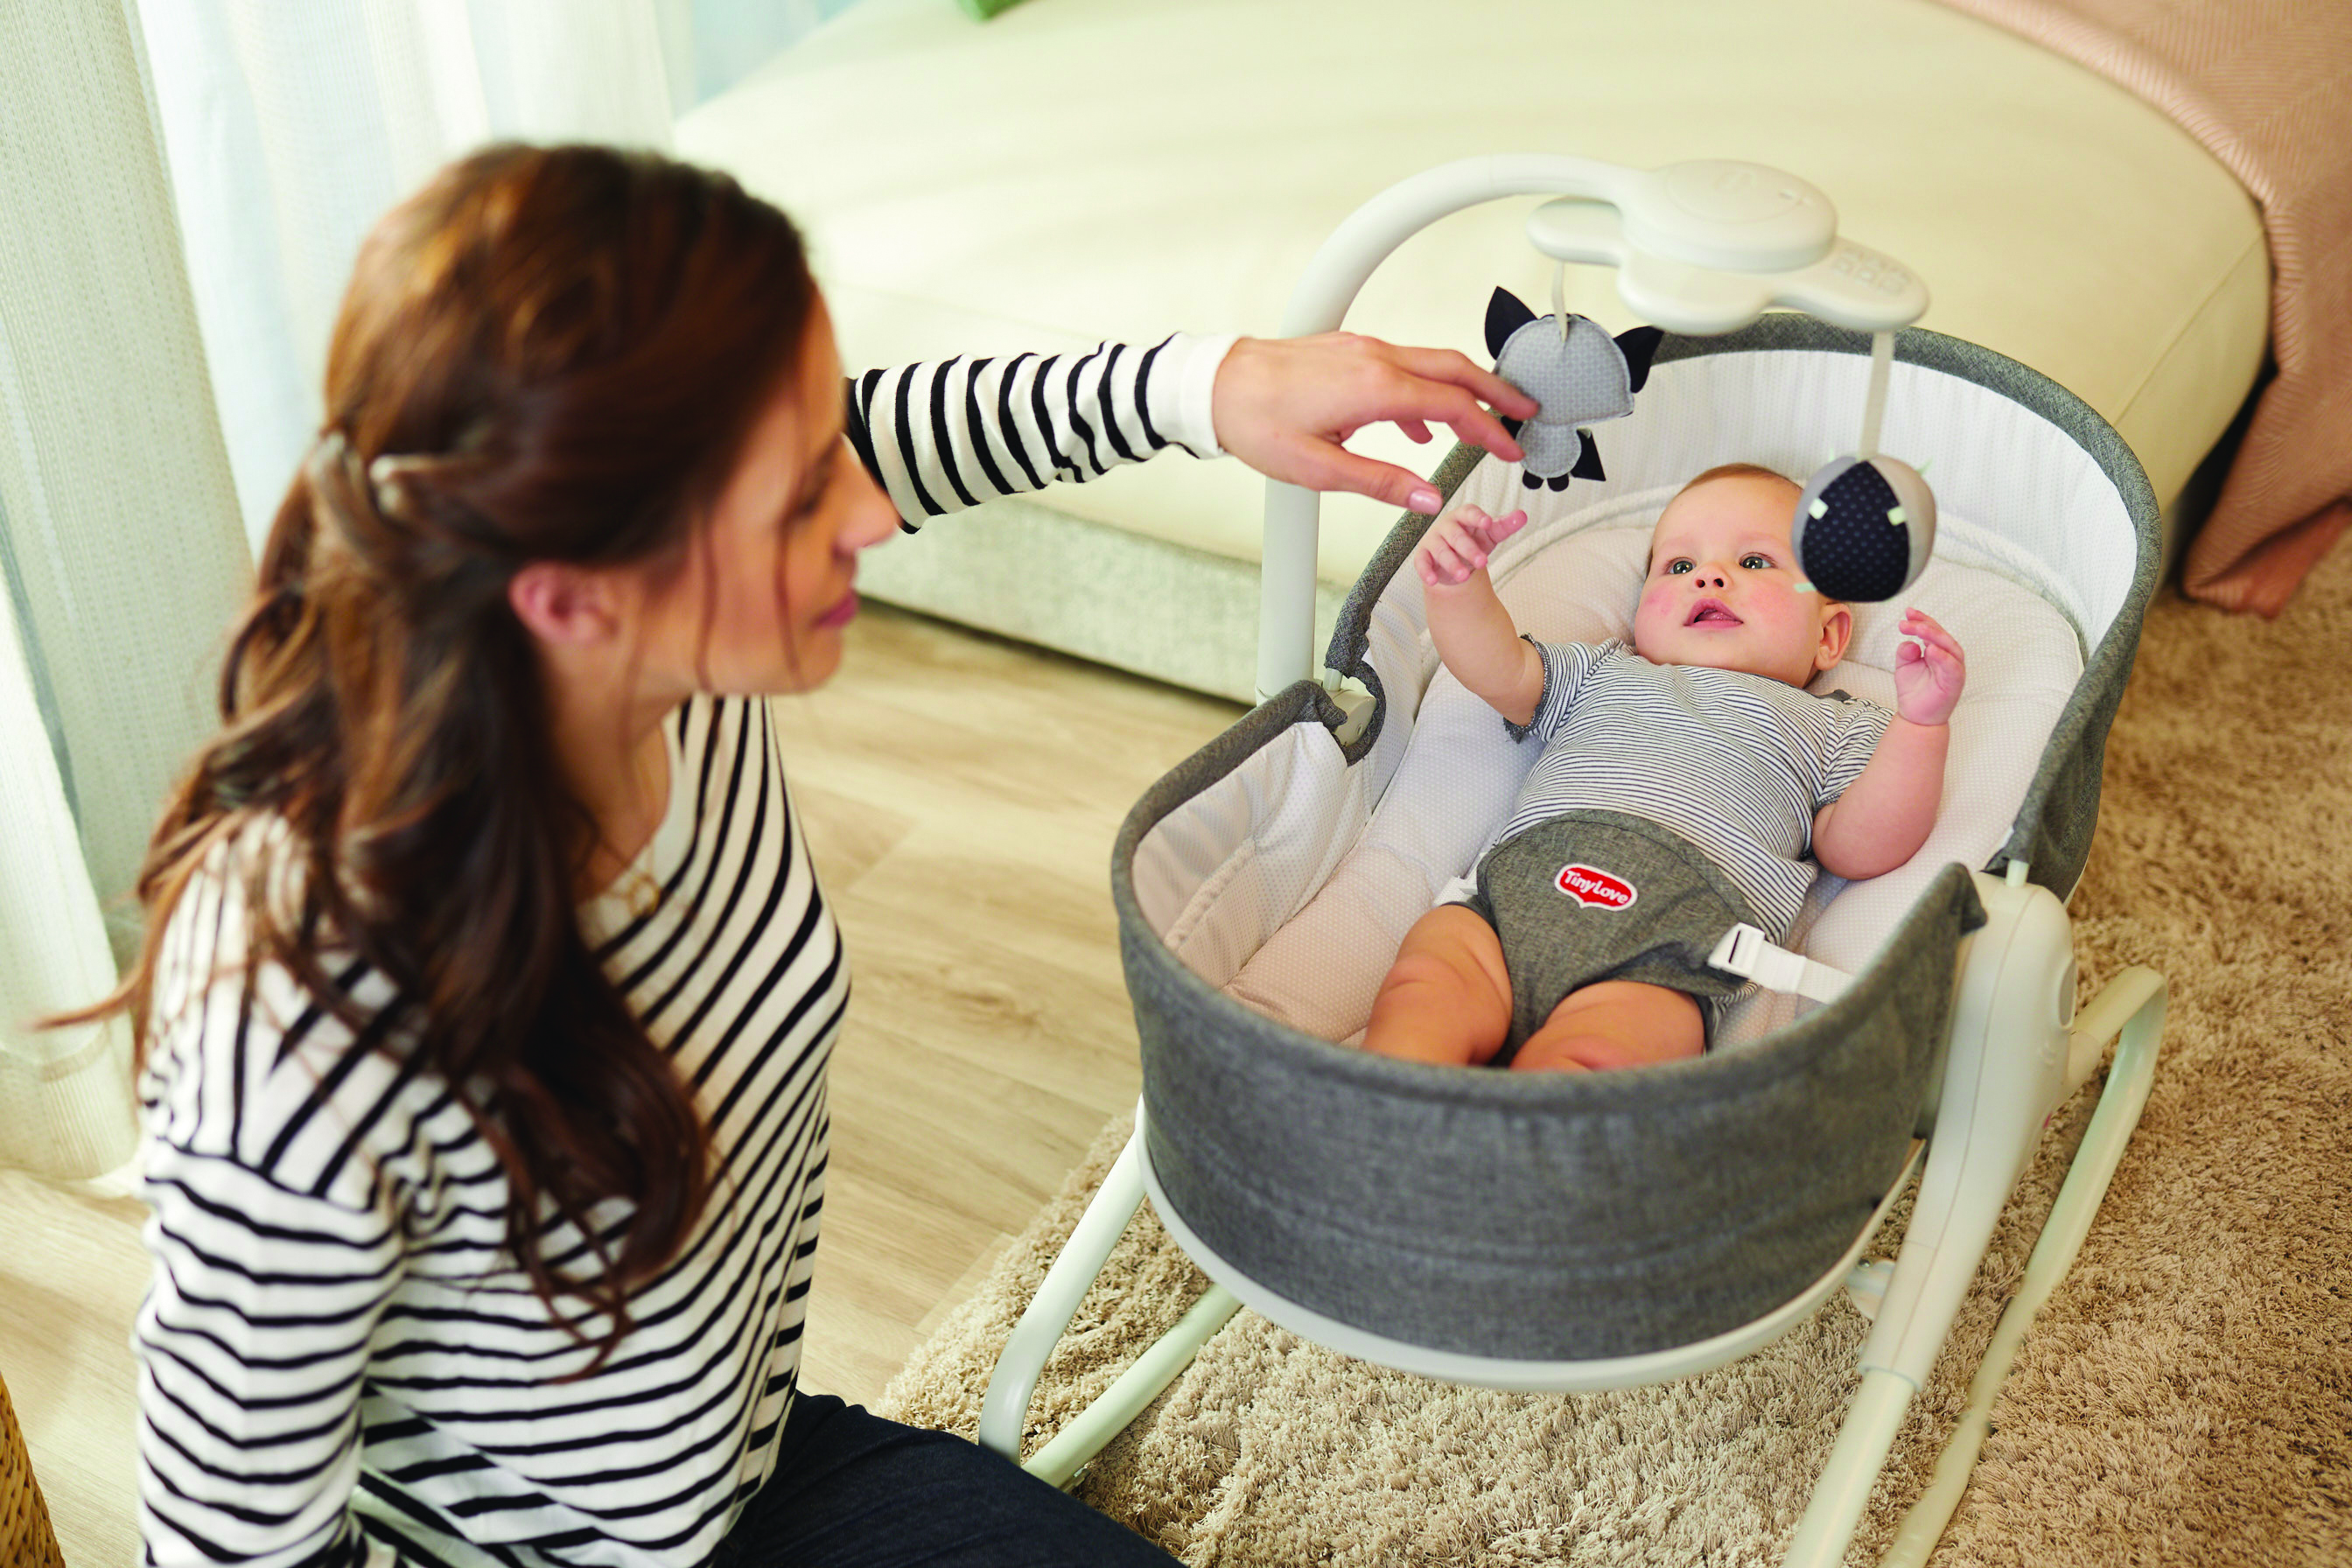 Tiny Love 3-in-1 Close To Me Bouncer